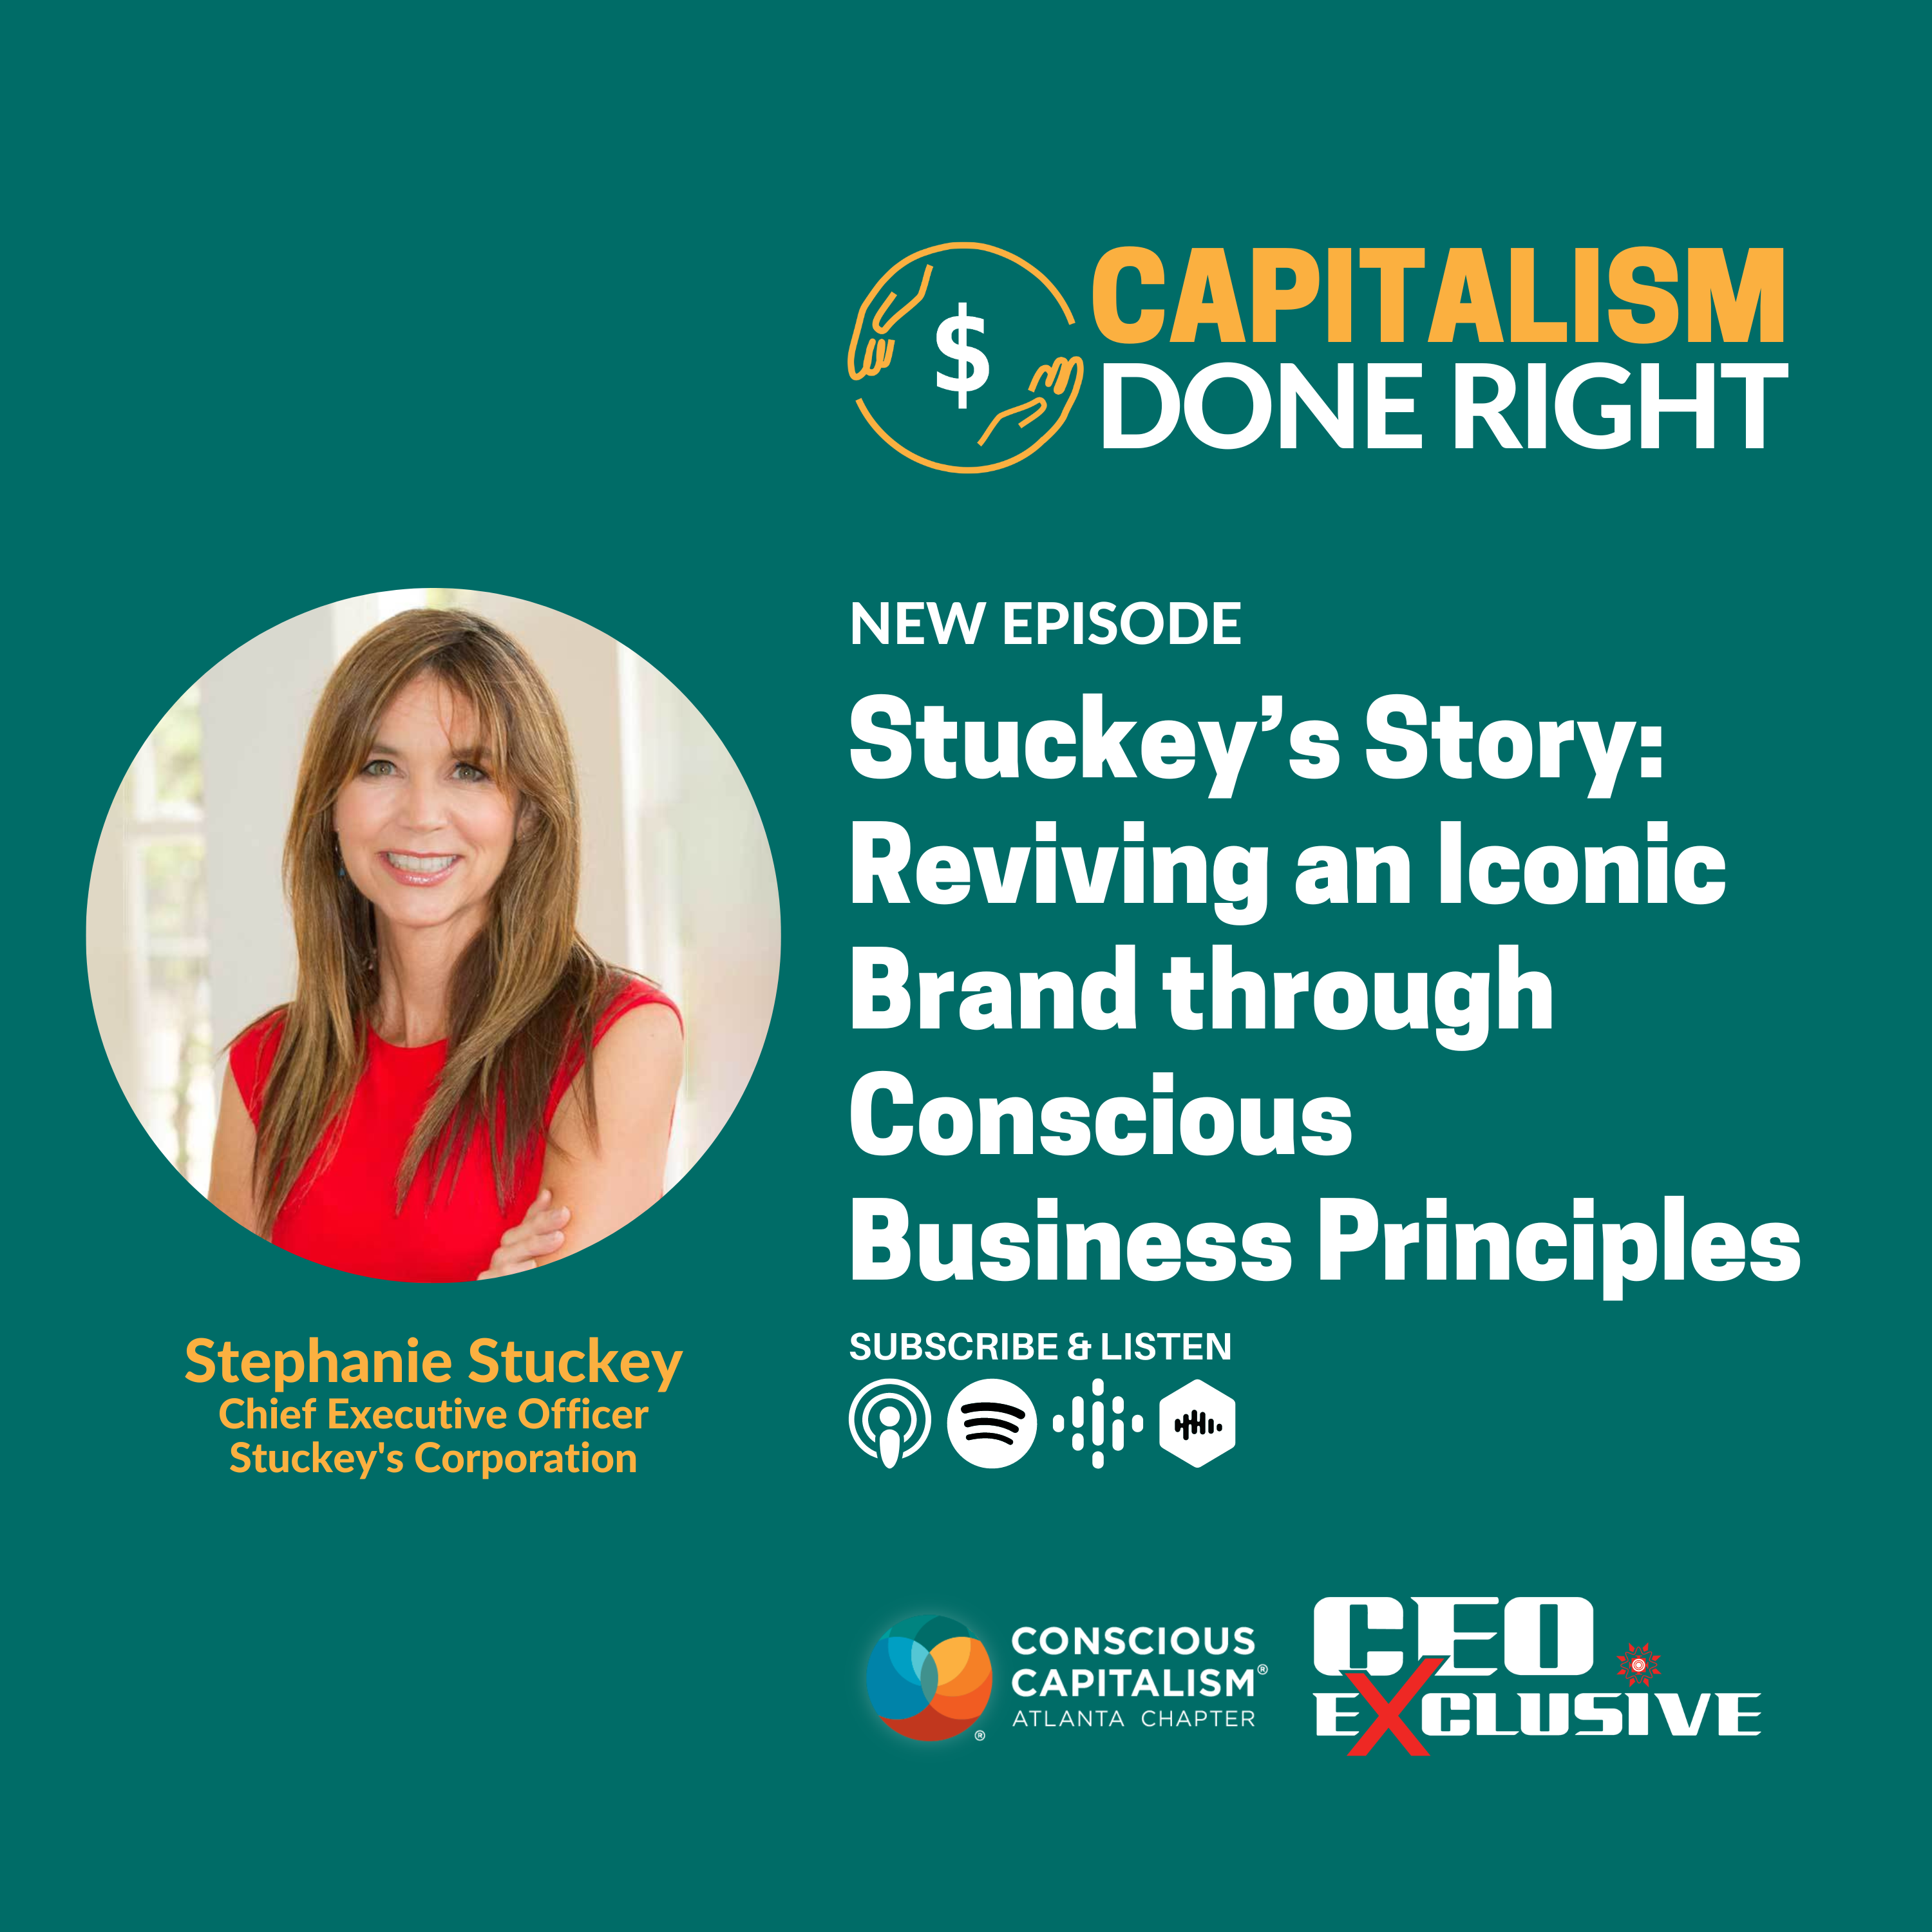 Stuckey’s Story: Reviving an Iconic Brand through Conscious Business Principles